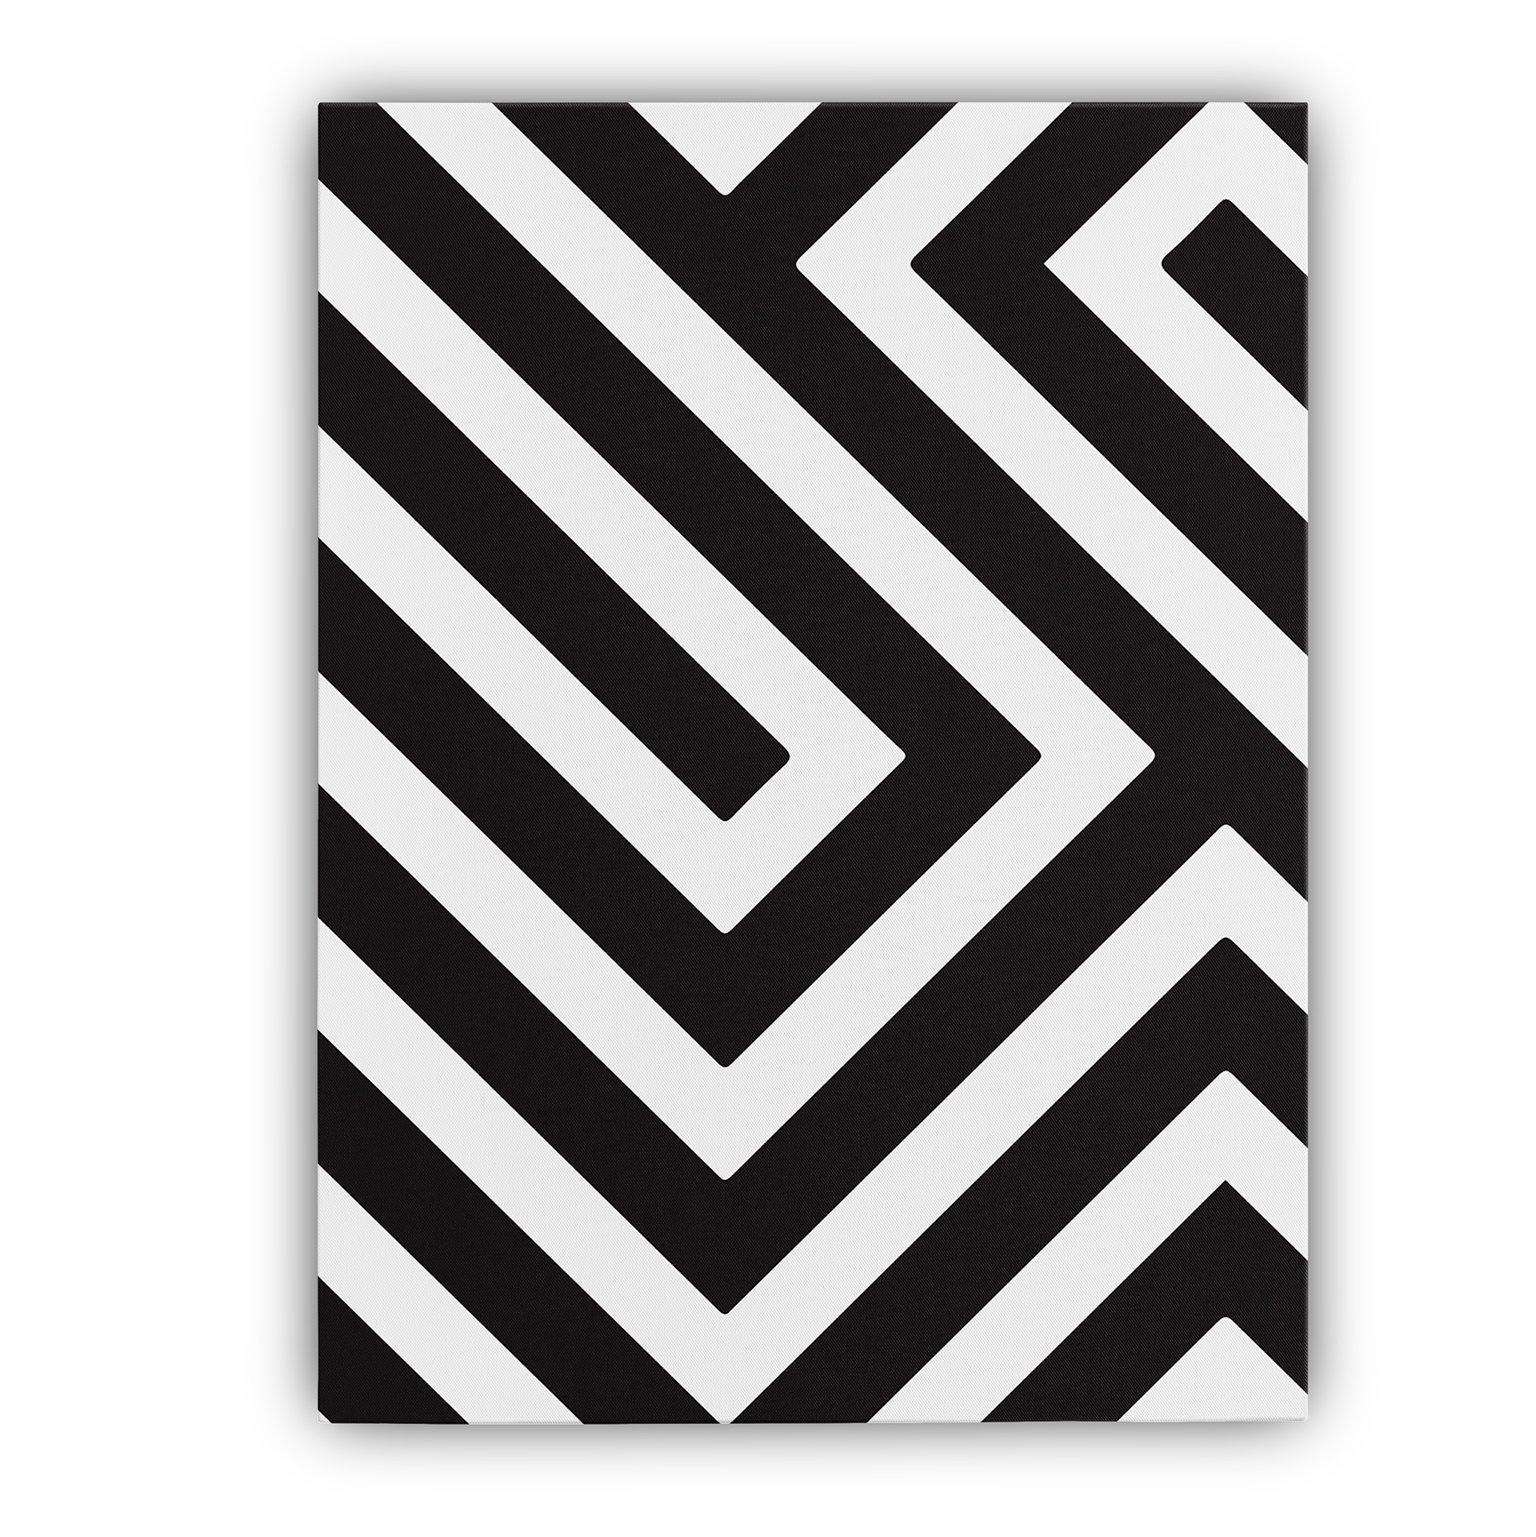 Abstract Geometric Lines Canvas Wido 